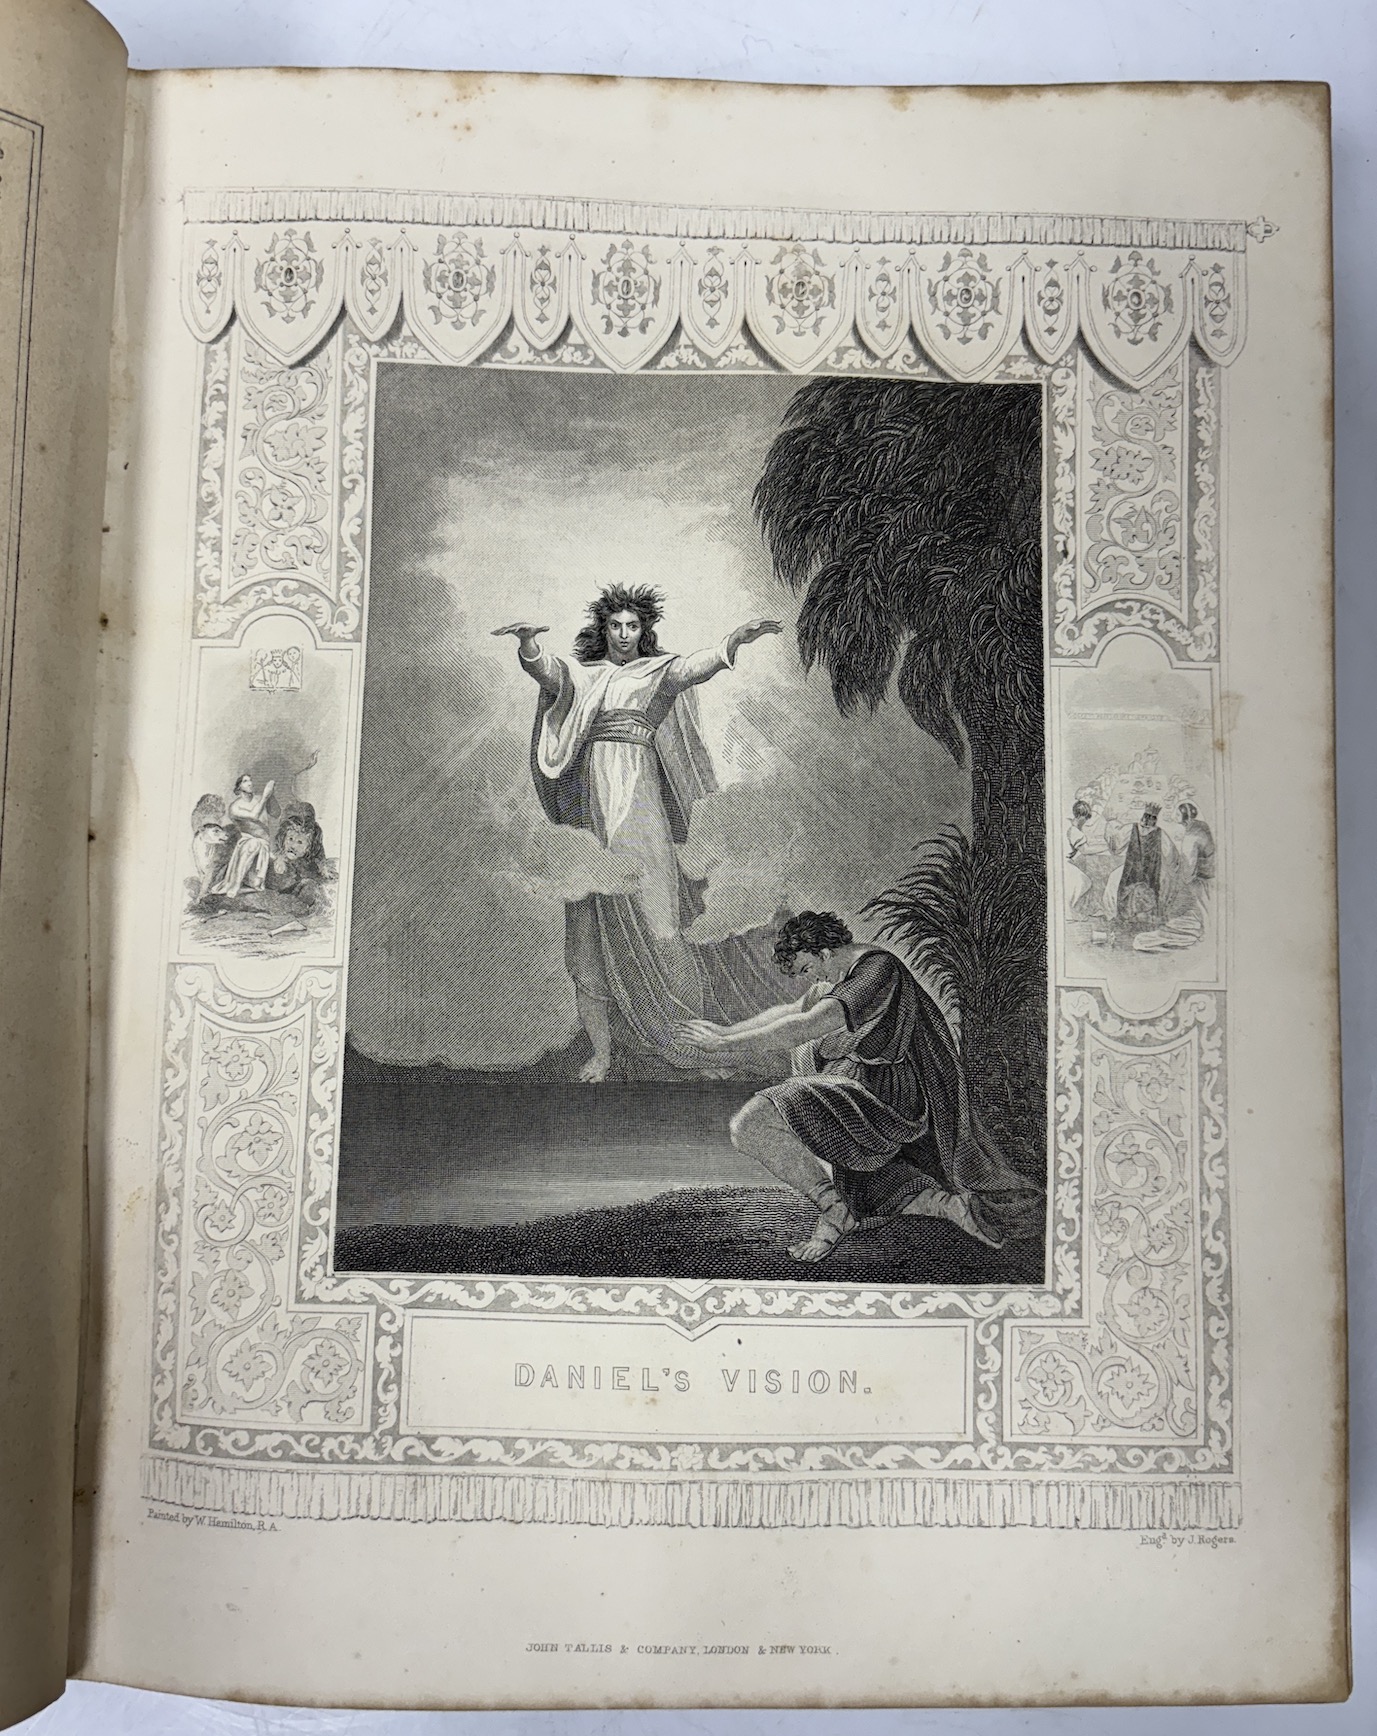 William Whiston, Works of Flavius Josephus, printed and published by John Tallis and Company, London and New York